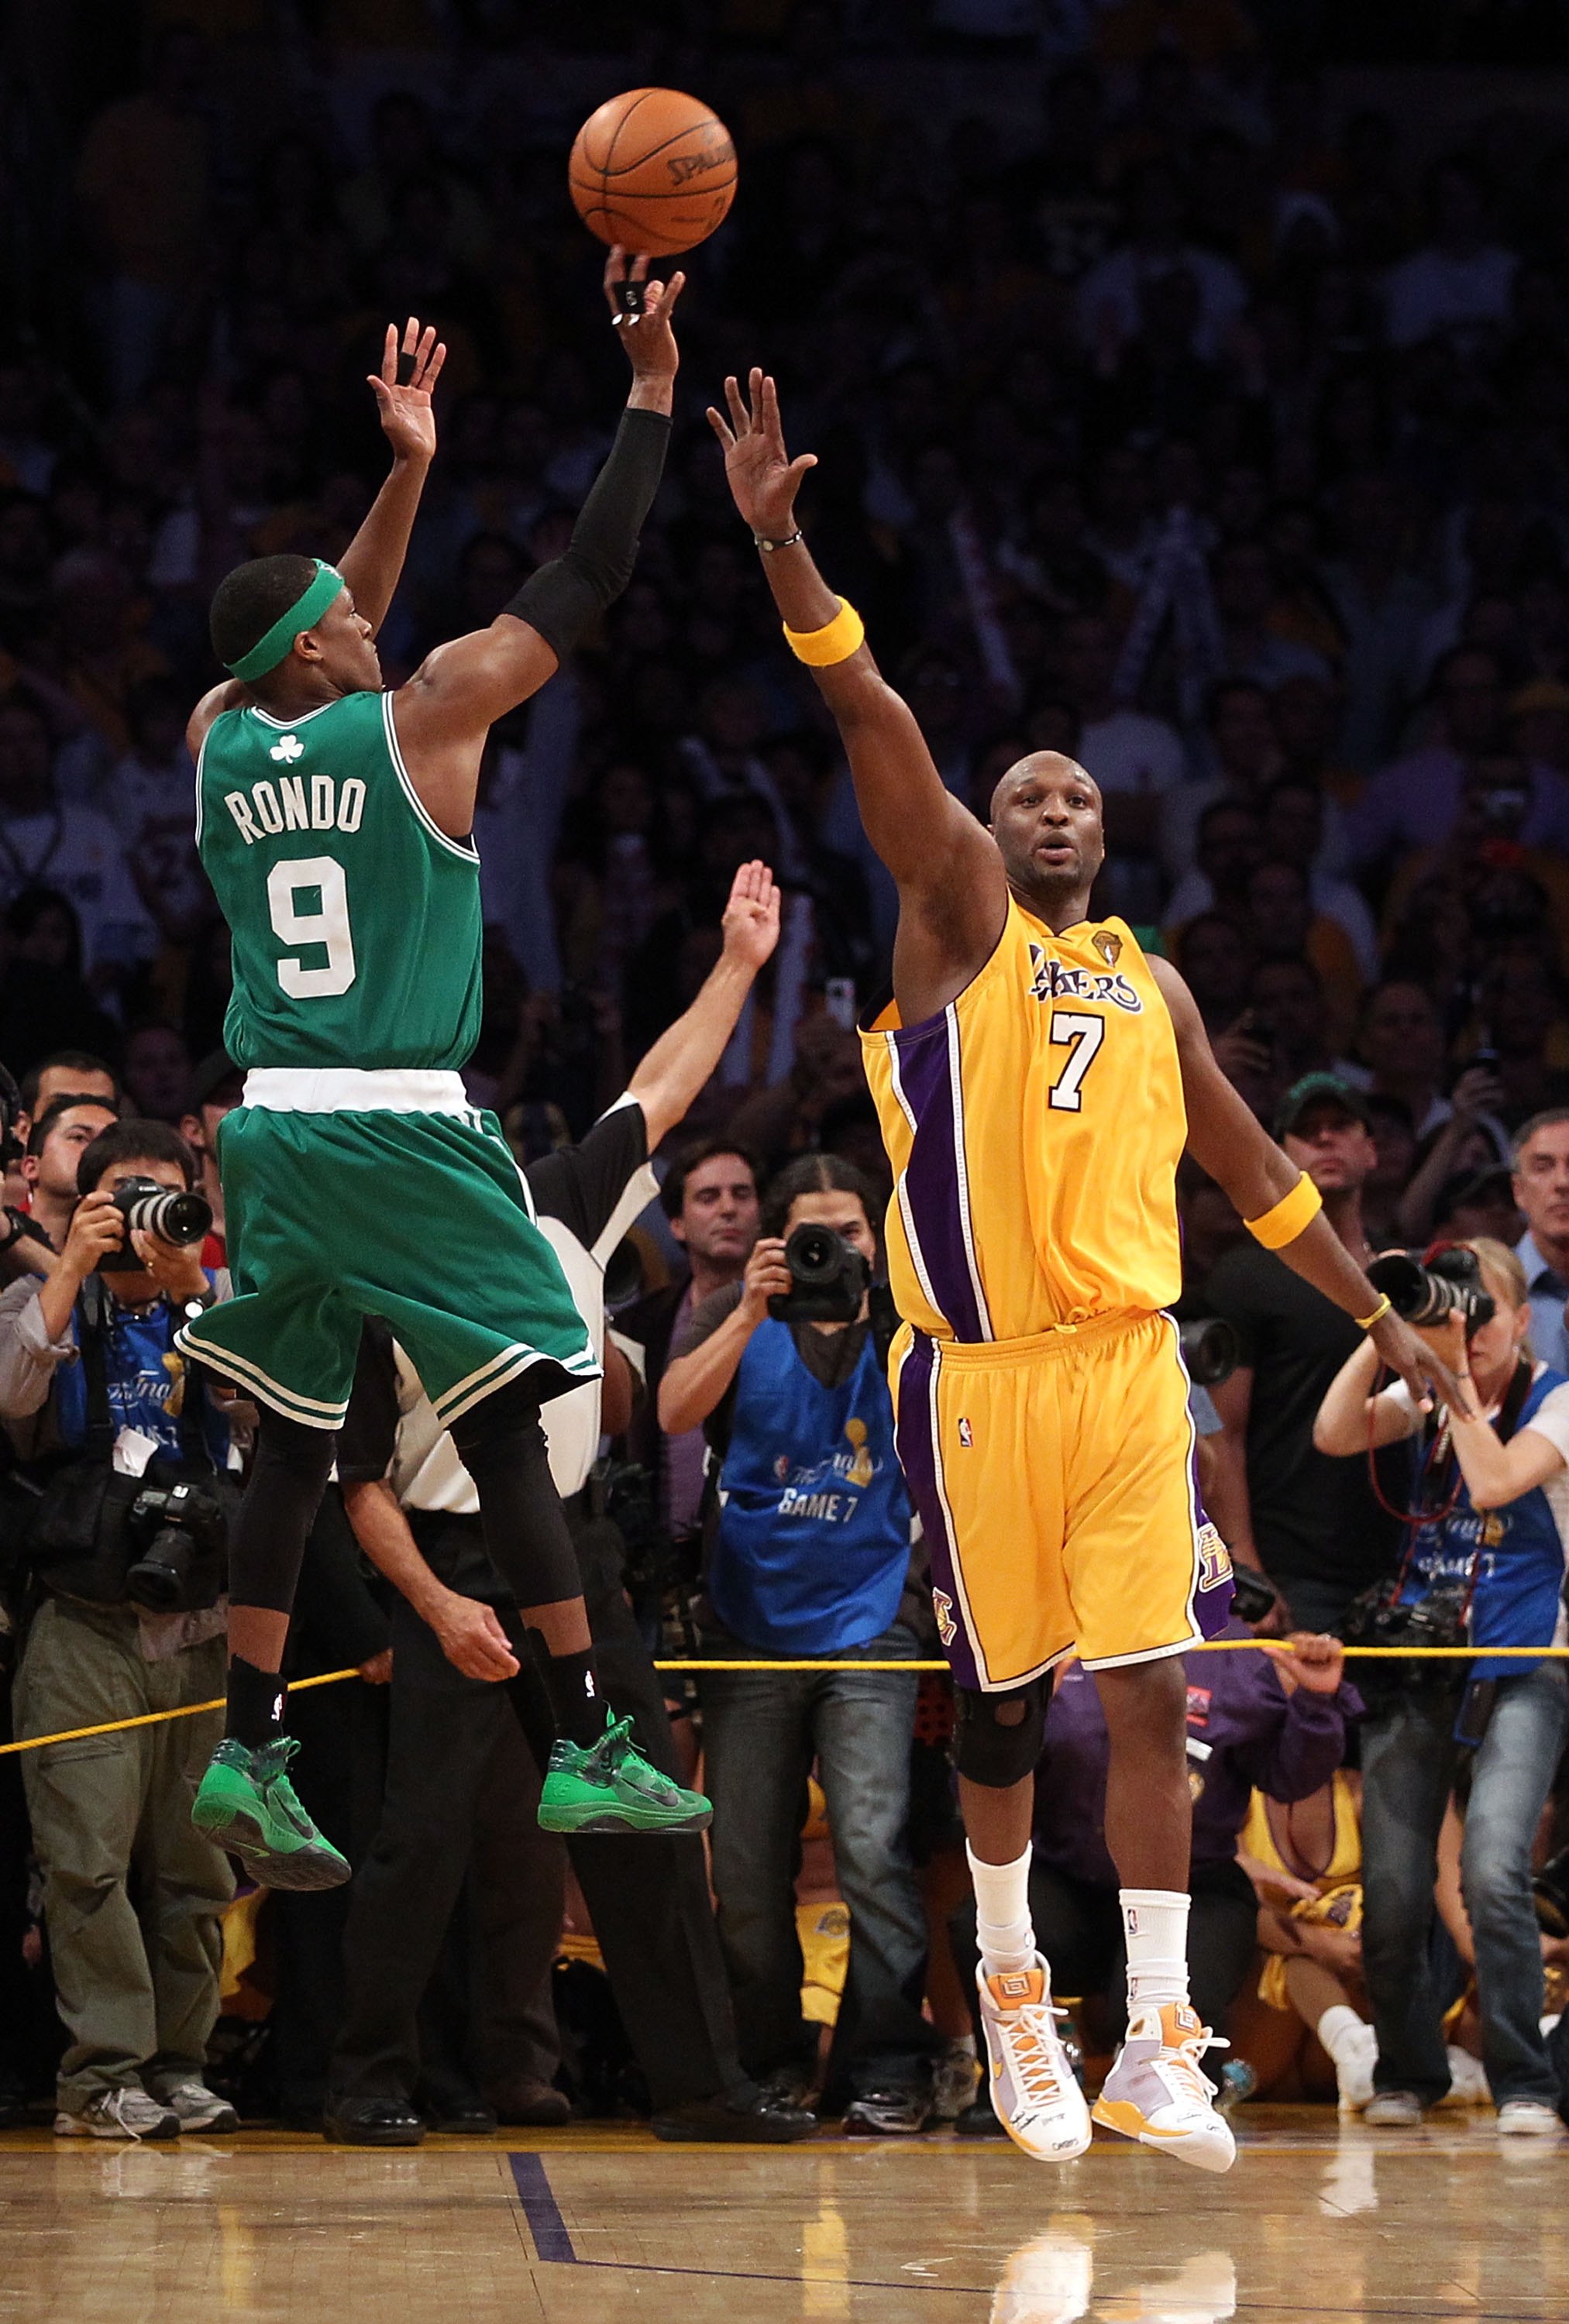 LOS ANGELES, CA - JUNE 17:  Rajon Rondo #9 of the Boston Celtics shoots a three-pointer in the final seconds over Lamar Odom #7 of the Los Angeles Lakers before the Celtics loss to the Los Angeles Lakers in Game Seven of the 2010 NBA Finals at Staples Cen